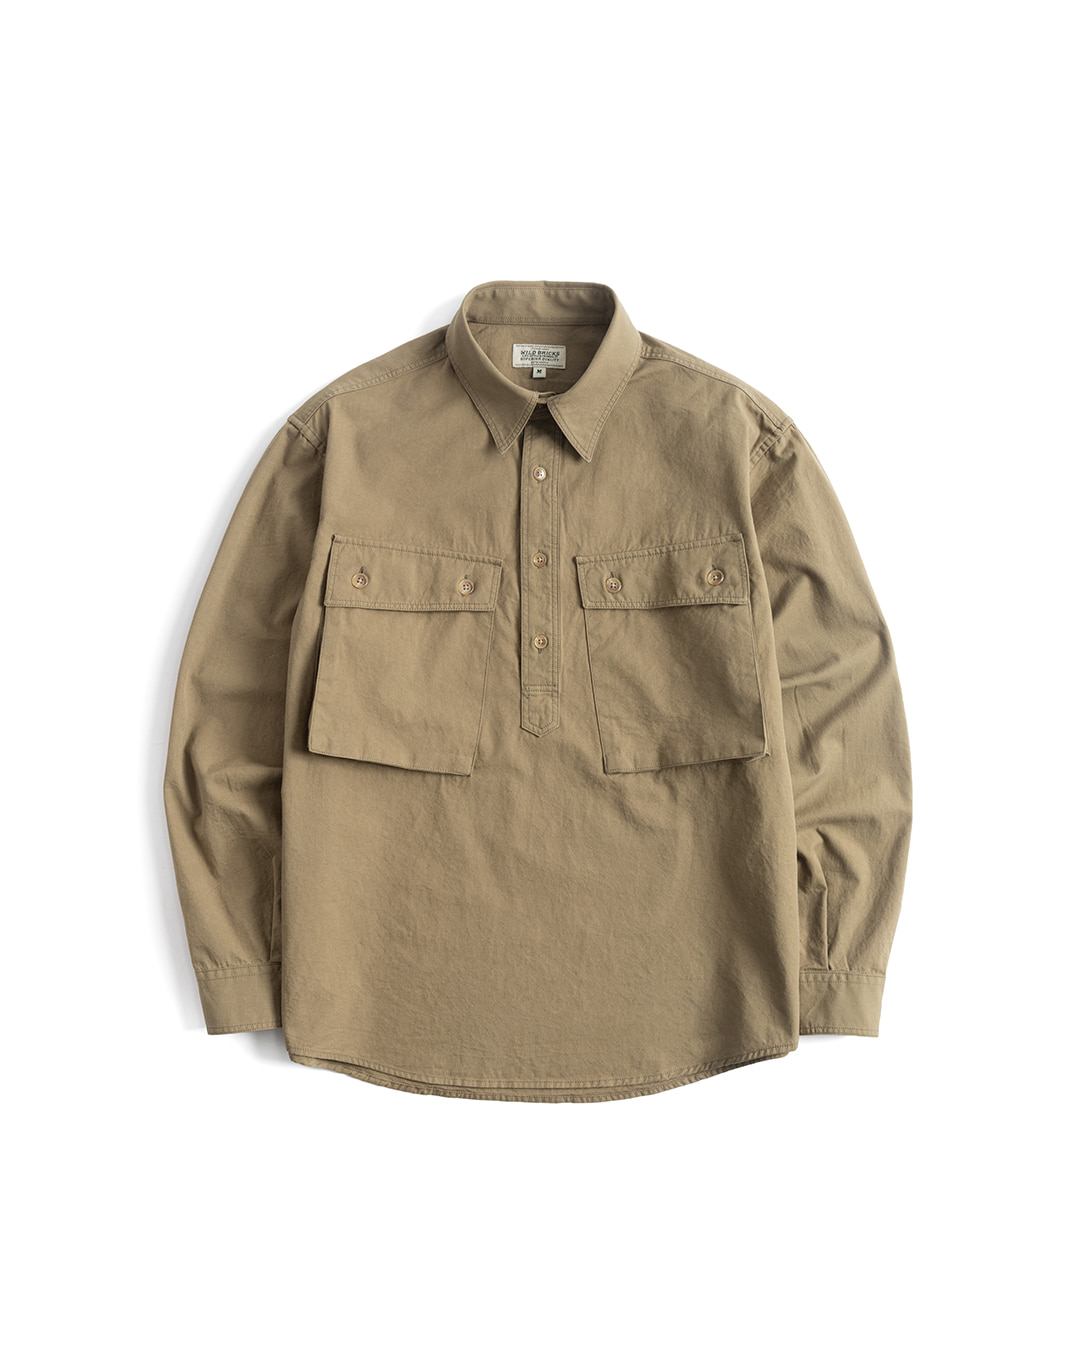 LW MILITARY PULLOVER SHIRT (olive)